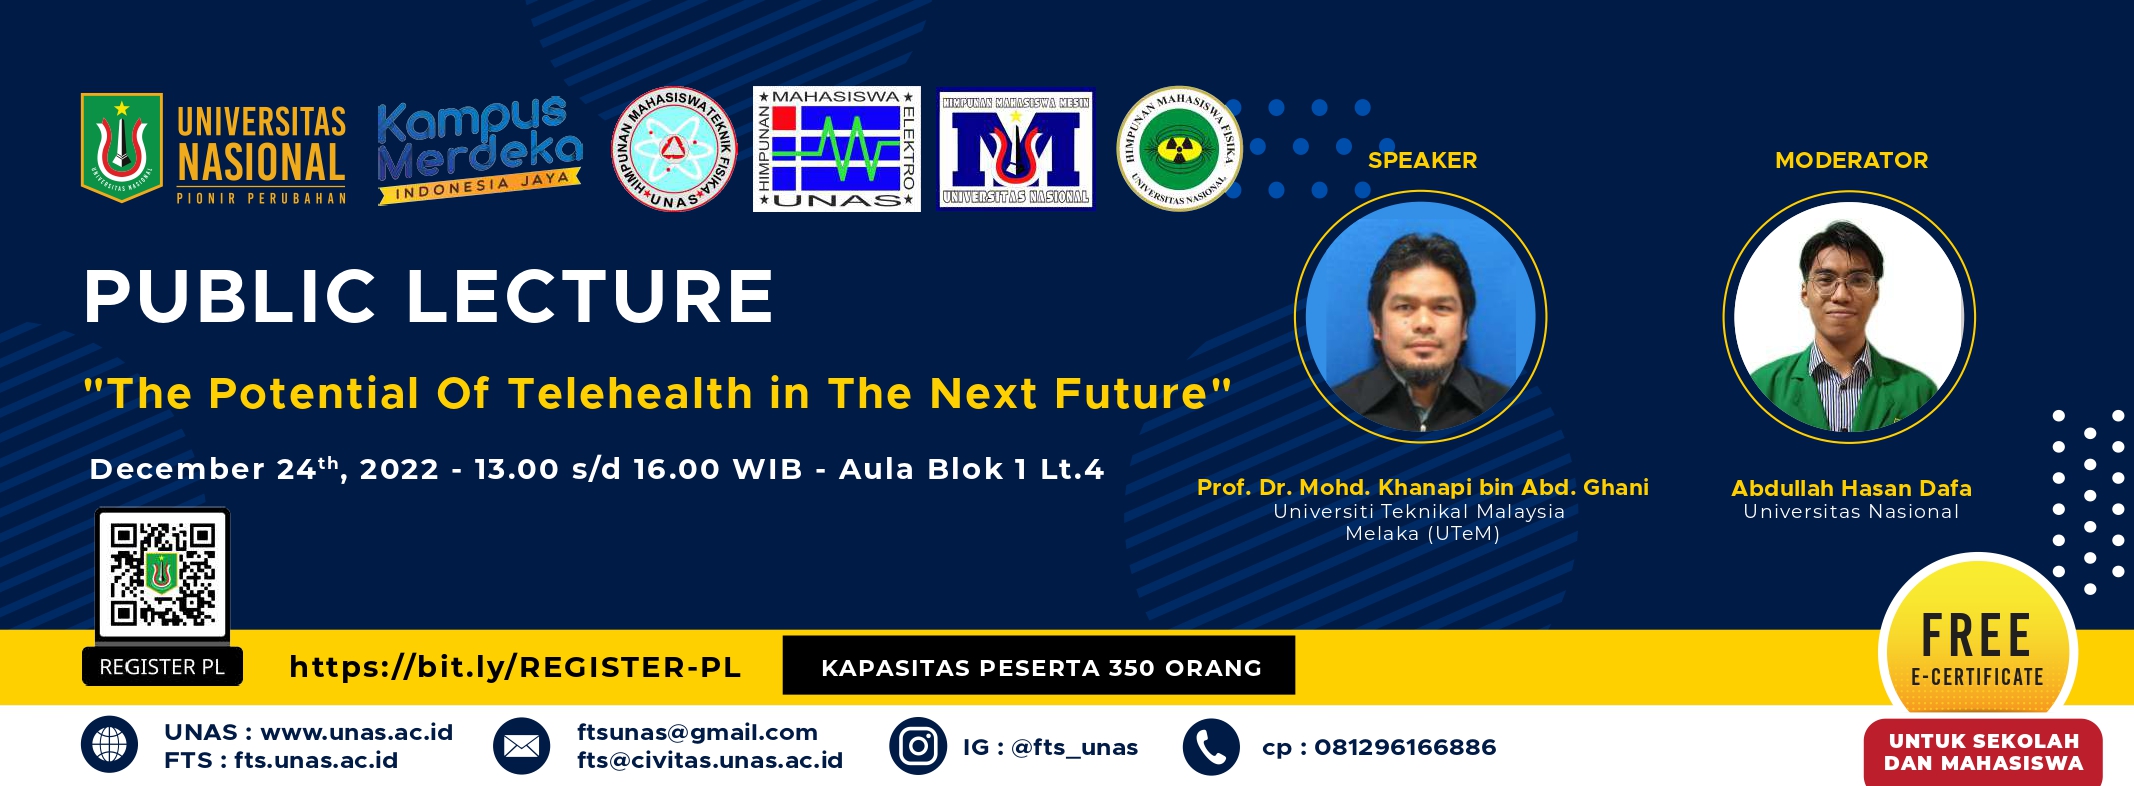 Public Lecture: The Potential of Telehealth in The Next Future